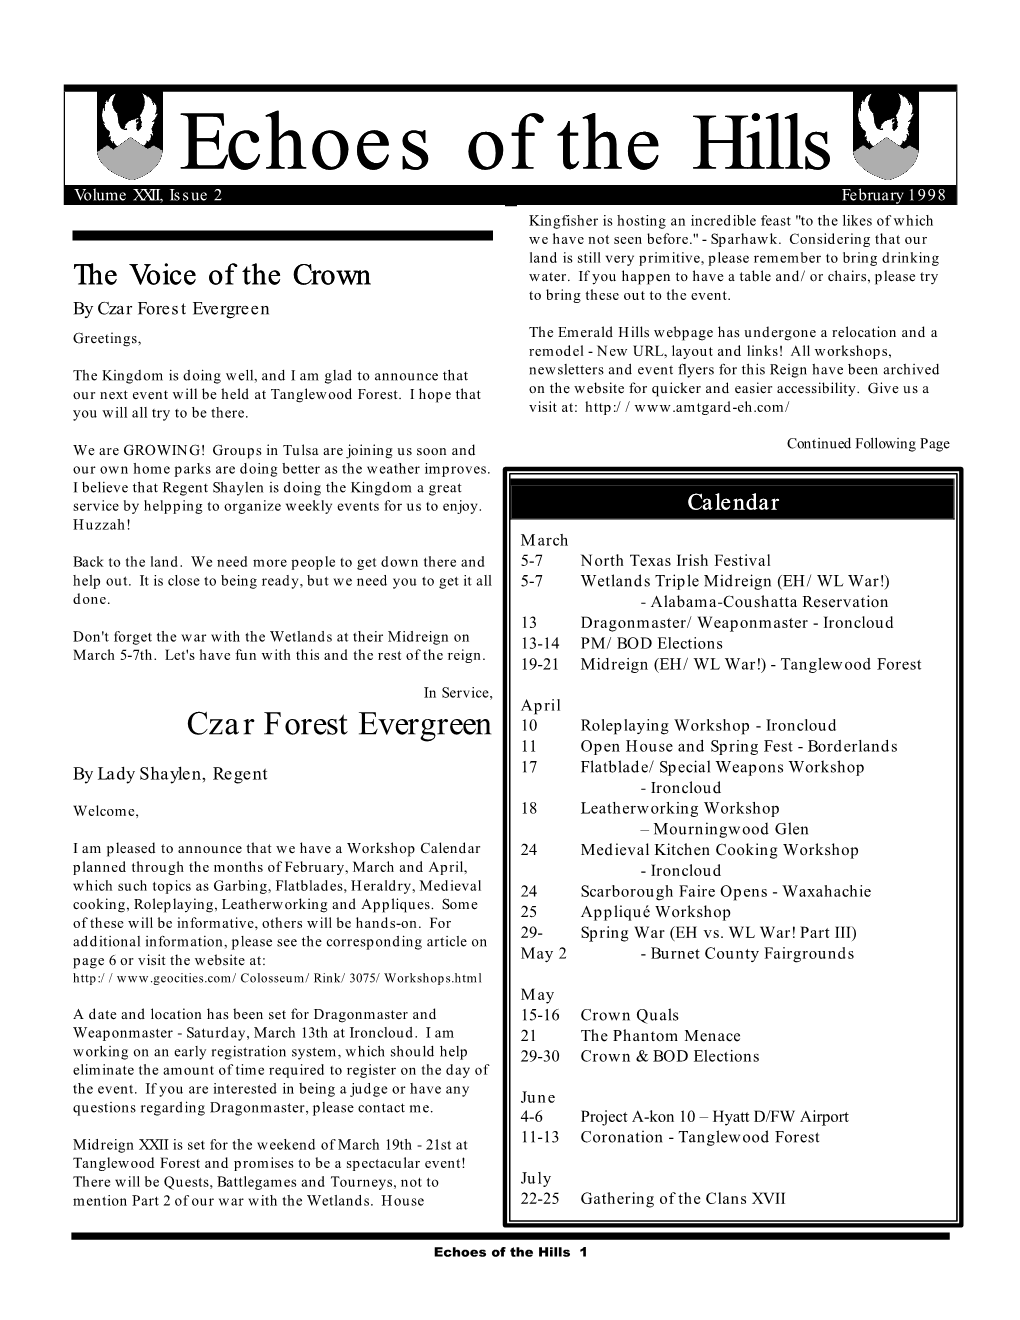 Echoes of the Hills Volume XXII, Issue 2 February 1998 Kingfisher Is Hosting an Incredible Feast "To the Likes of Which We Have Not Seen Before." - Sparhawk